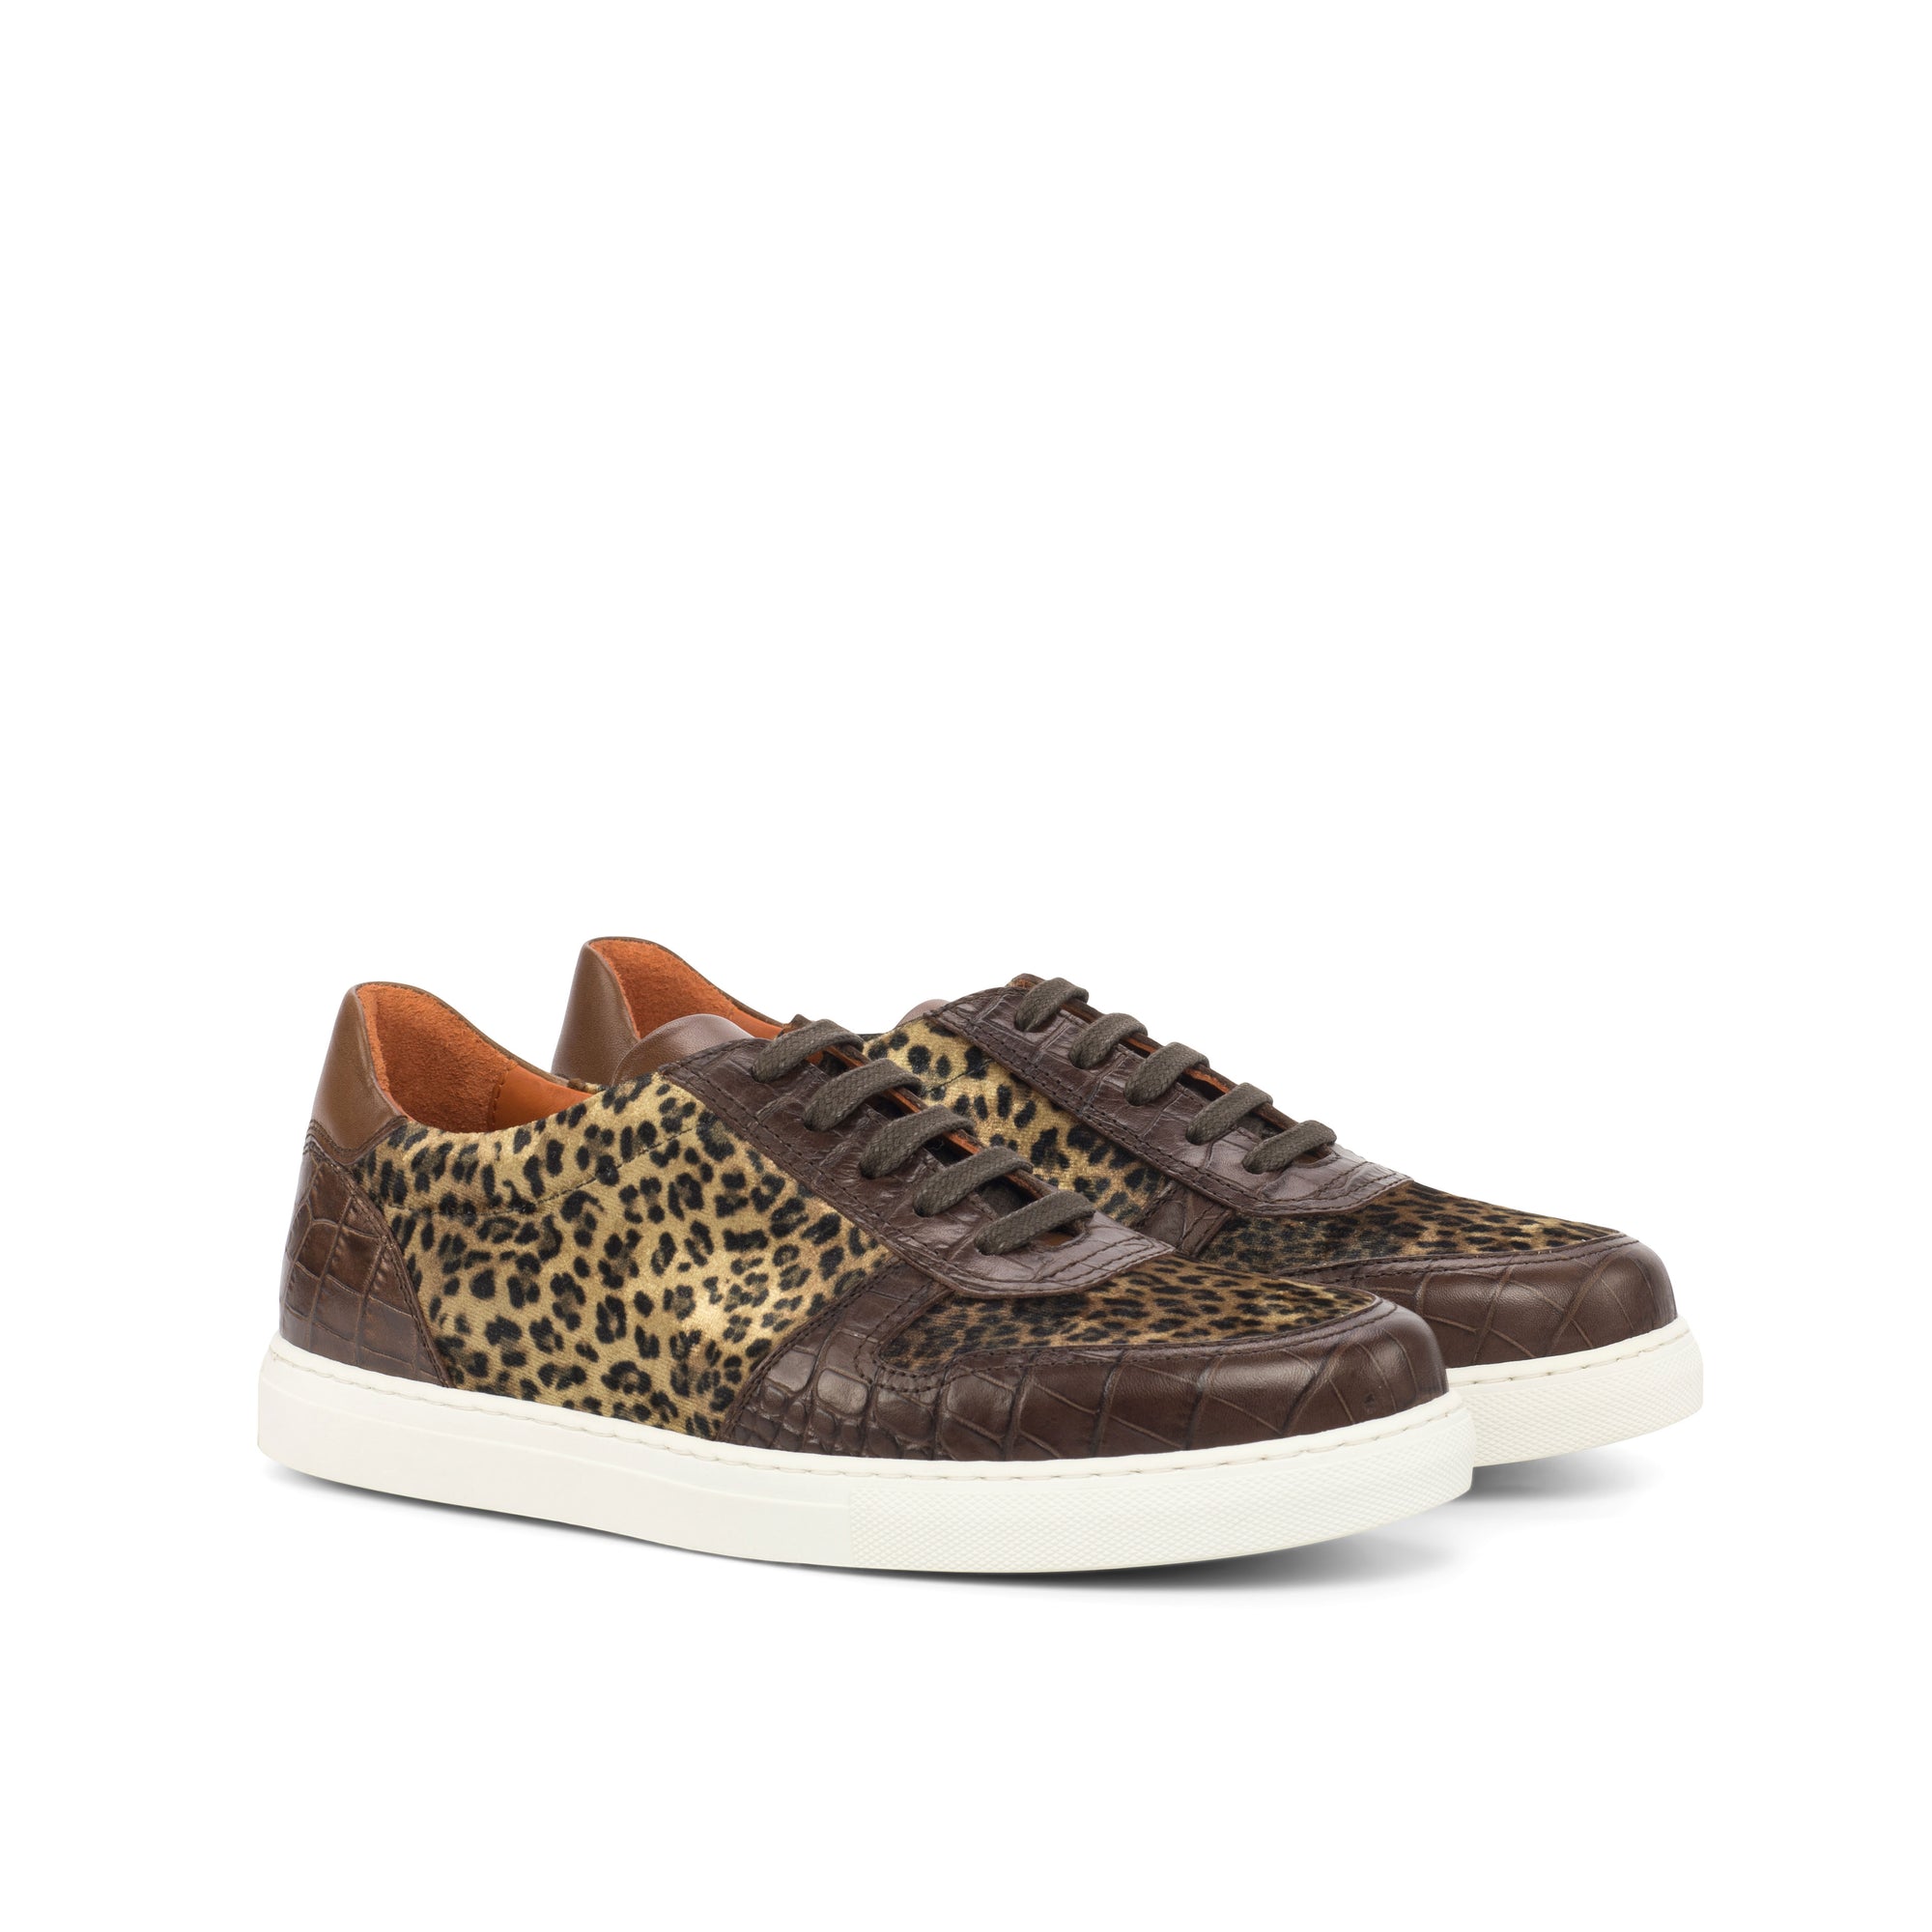 Women's Leopard Print Superior Leather Sneakers